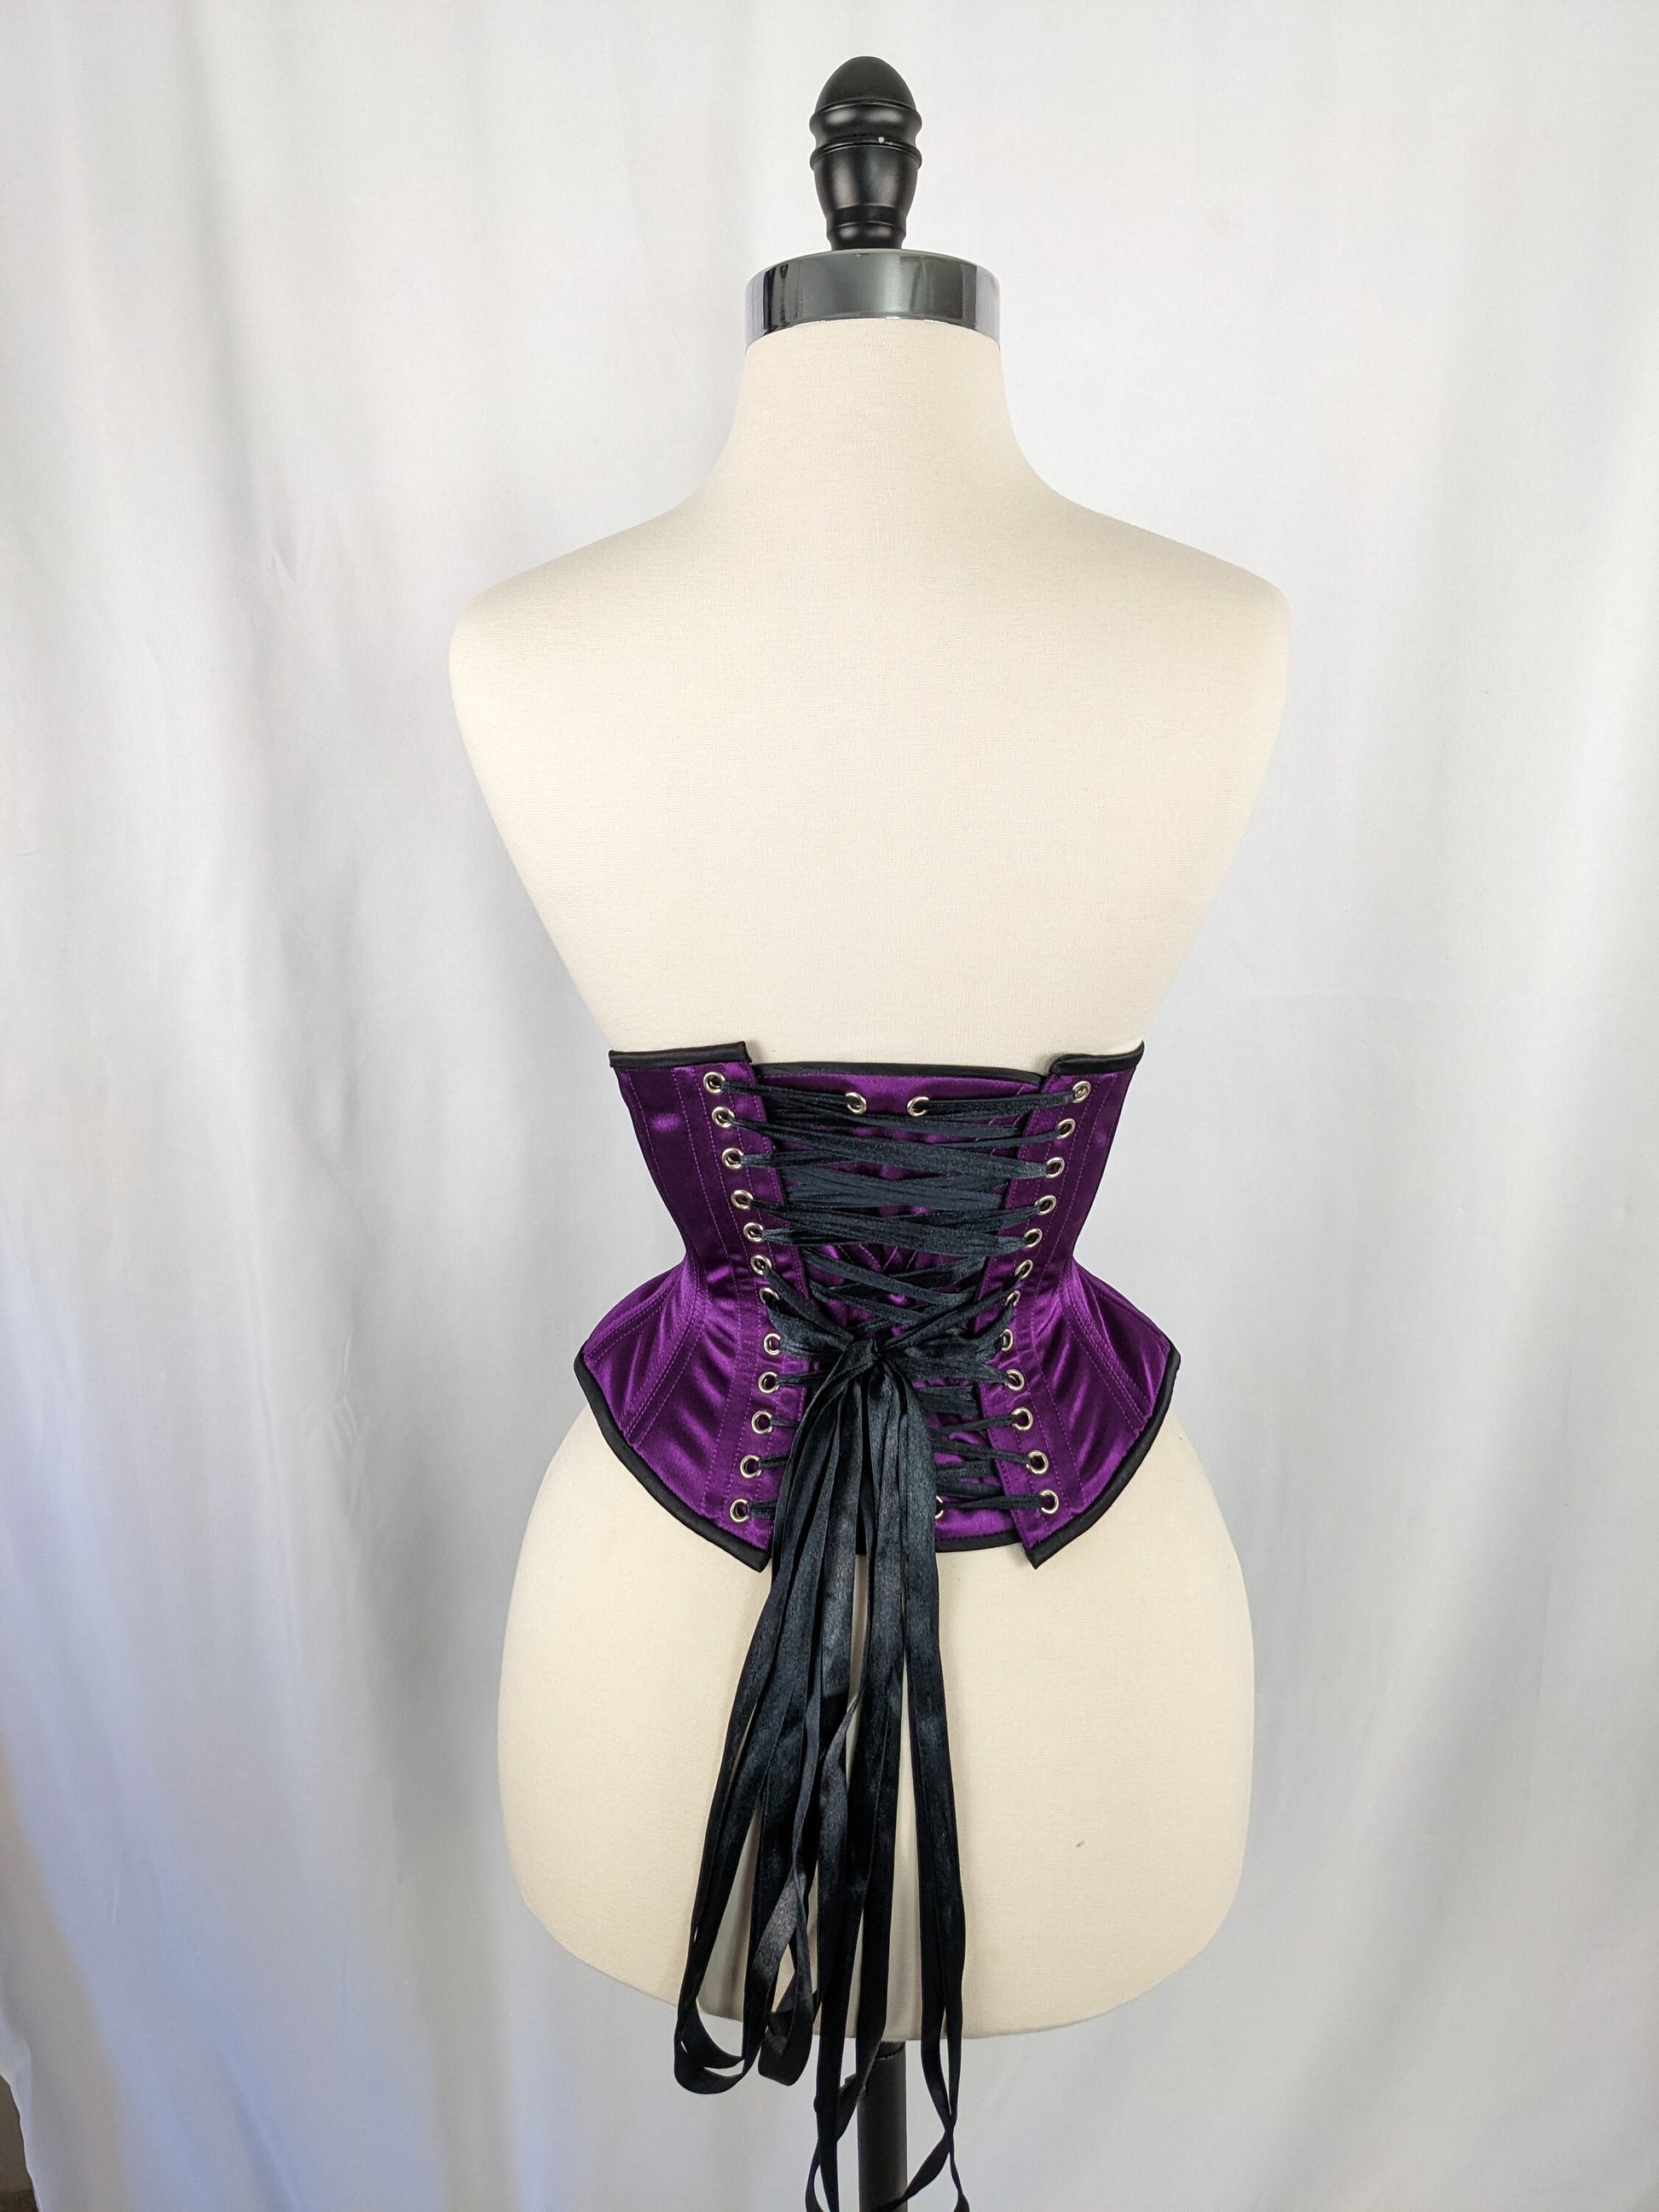 How to Get a Smaller Waist & Bigger Hips: Welcome, Corsetry!